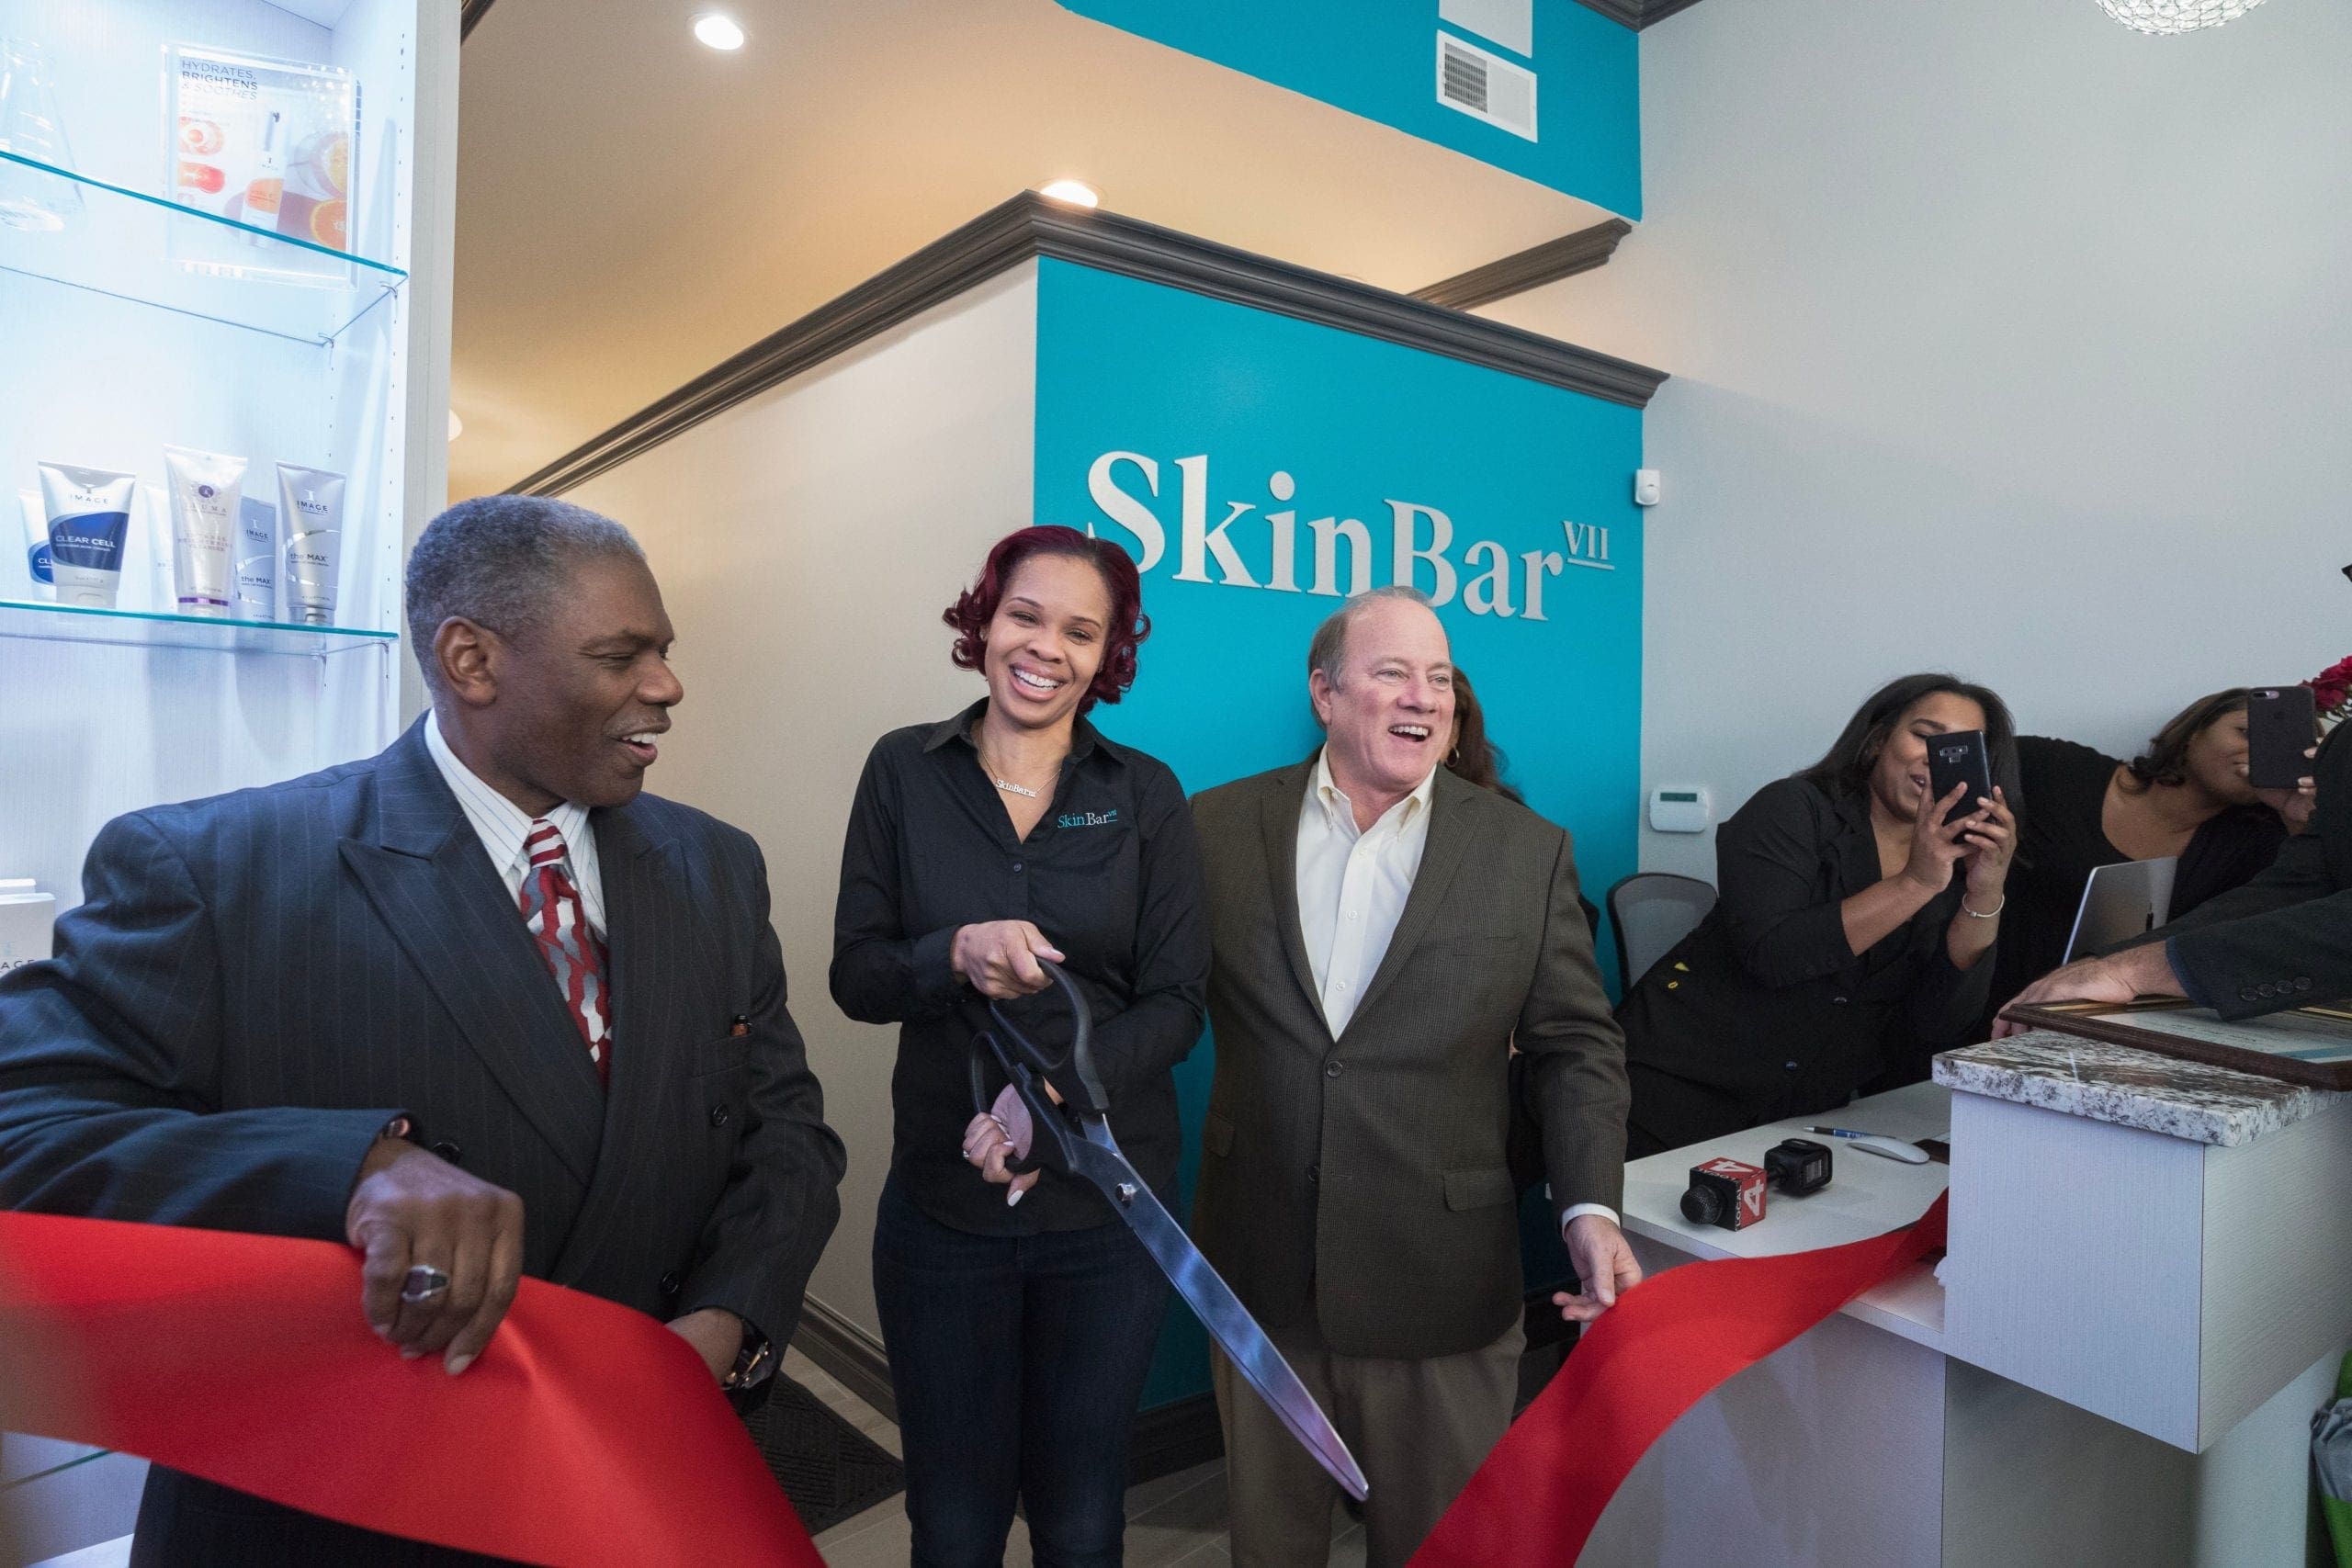 Sevyn Jones cuts ribbon at the grand opening ceremony for Skin Bar VII